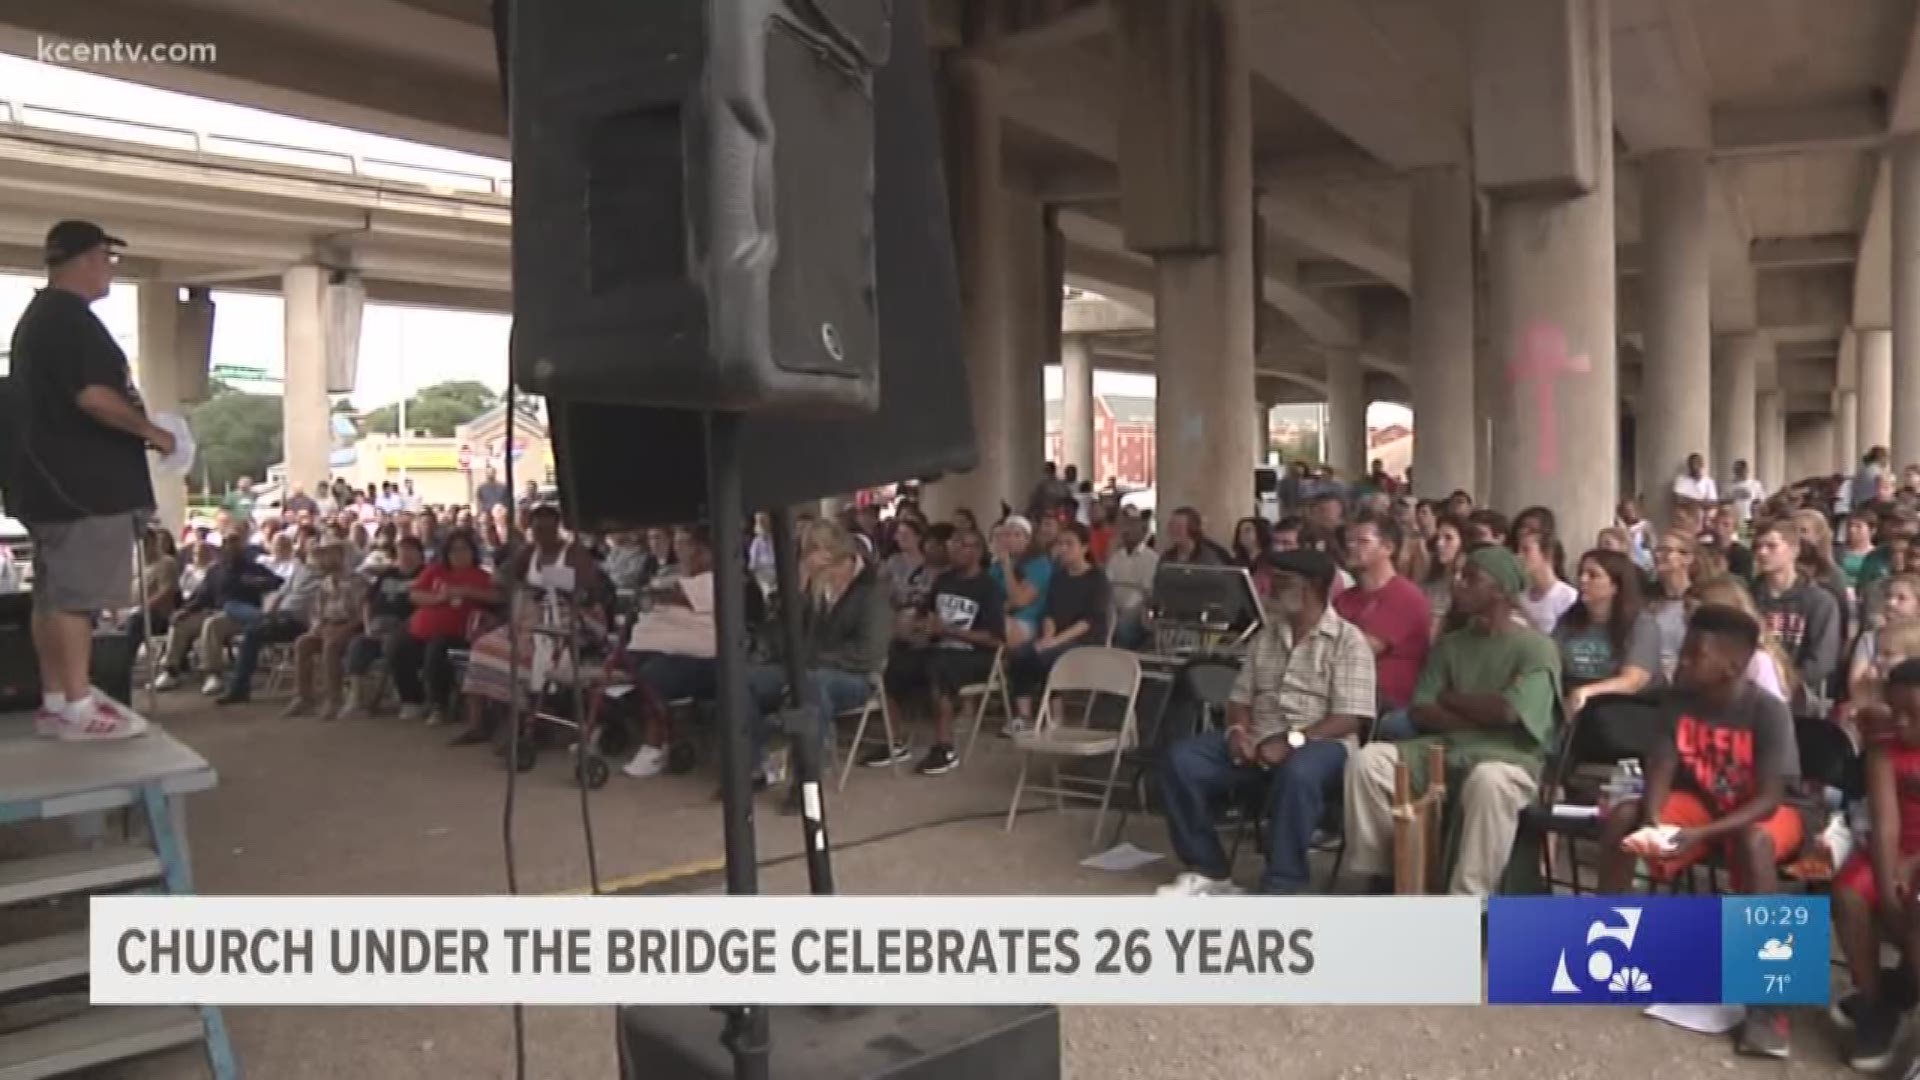 A unique church in Waco has been serving the homeless under the I-35 bridge for 26 years now.